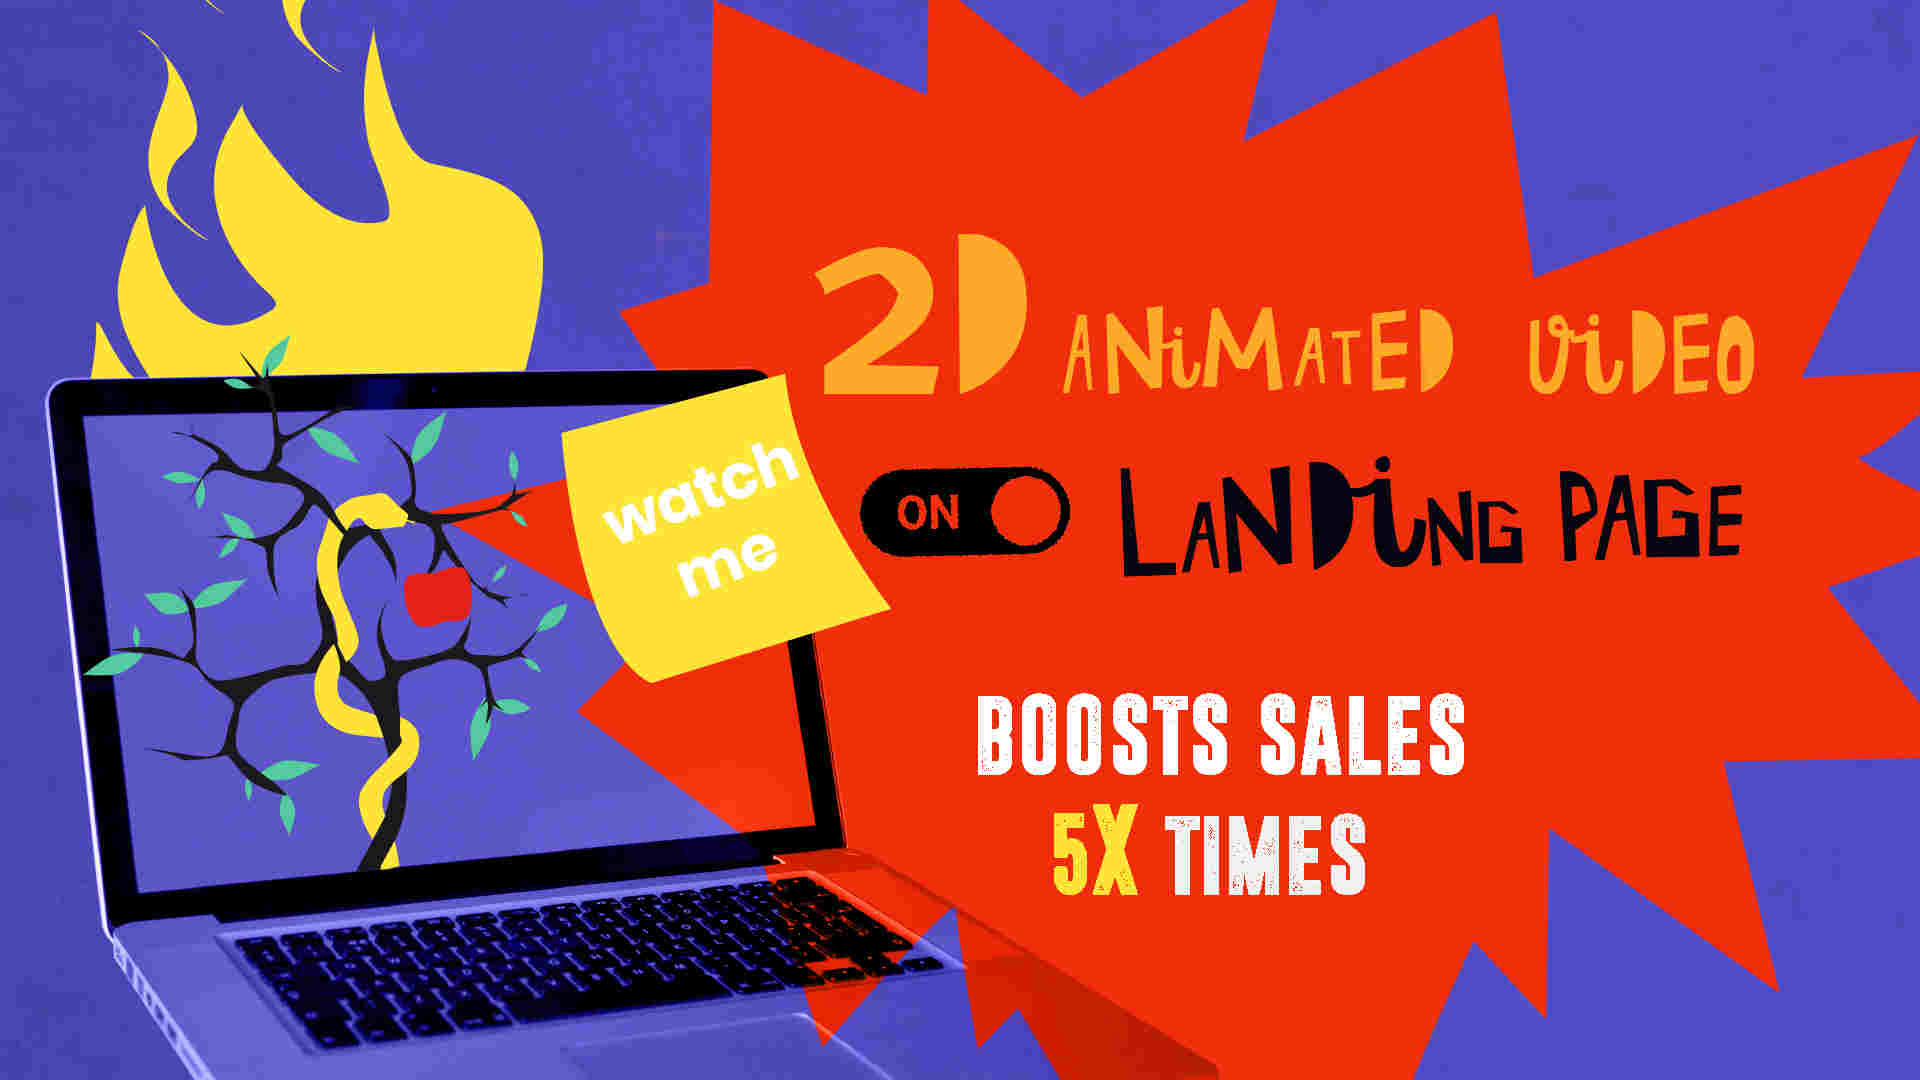 2D on landing page boost